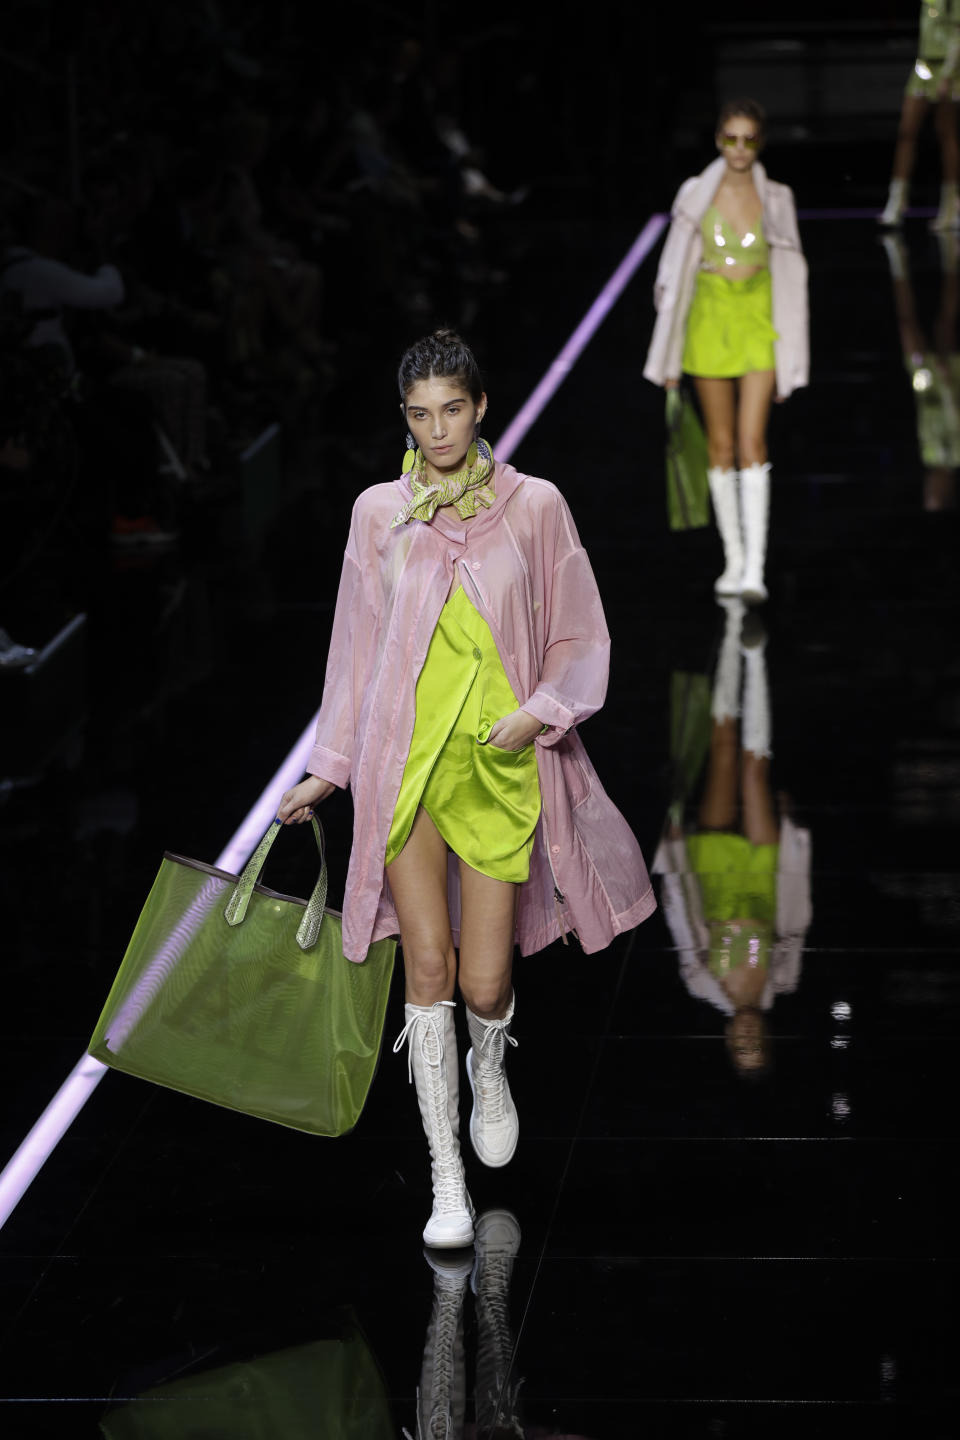 Models wear creations as part of the Emporio Armani women's 2019 Spring-Summer collection, unveiled during the Fashion Week in Milan, Italy, Thursday, Sept. 20, 2018. (AP Photo/Luca Bruno)